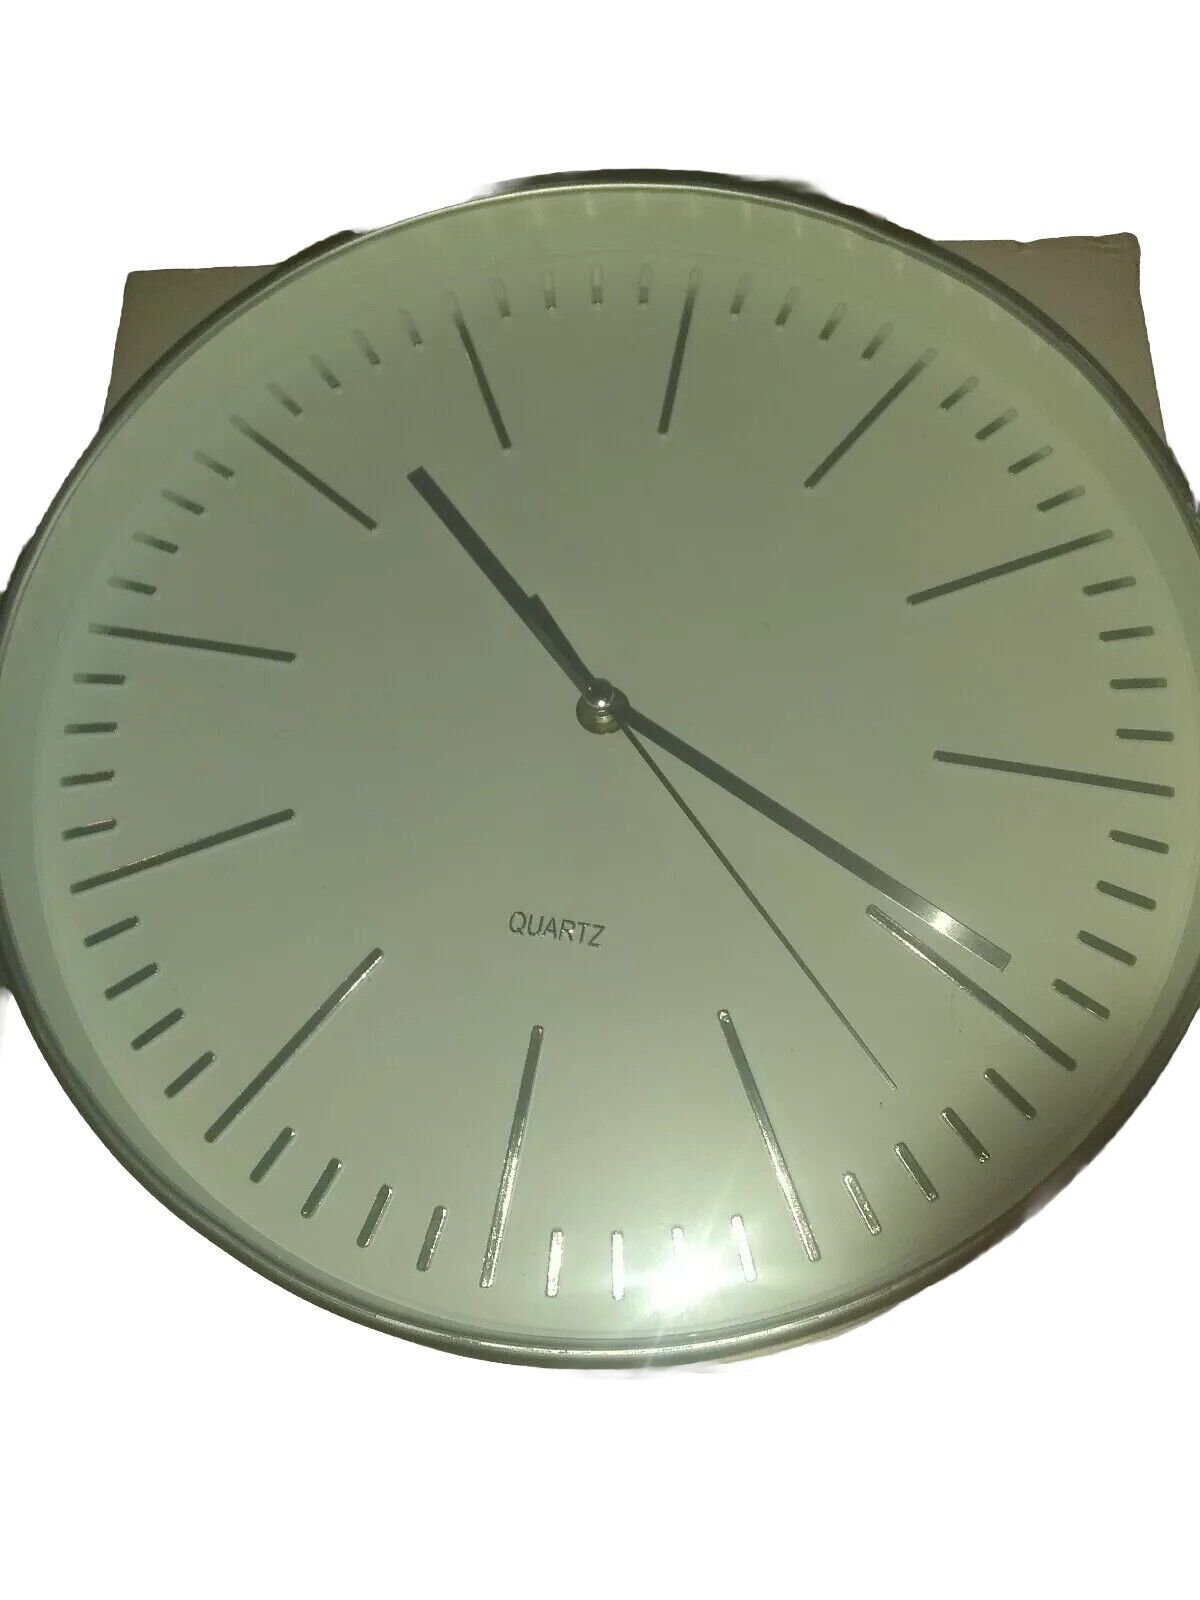 WHW Whole House Worlds Bright White Quartz Modern Wall Clock New Made in Germany